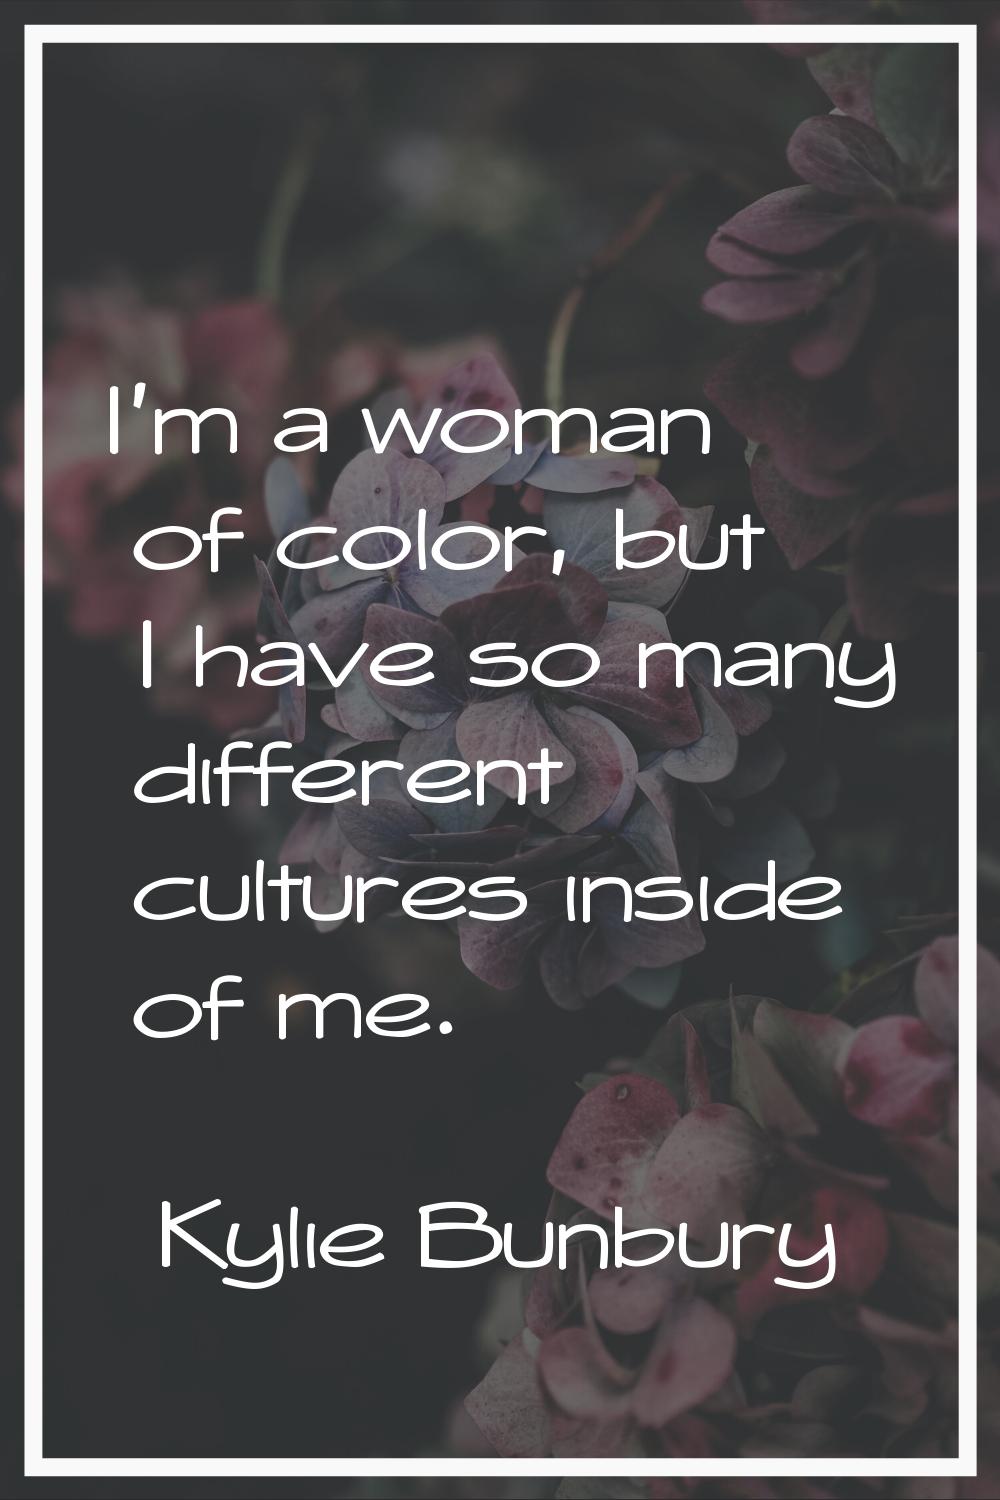 I'm a woman of color, but I have so many different cultures inside of me.